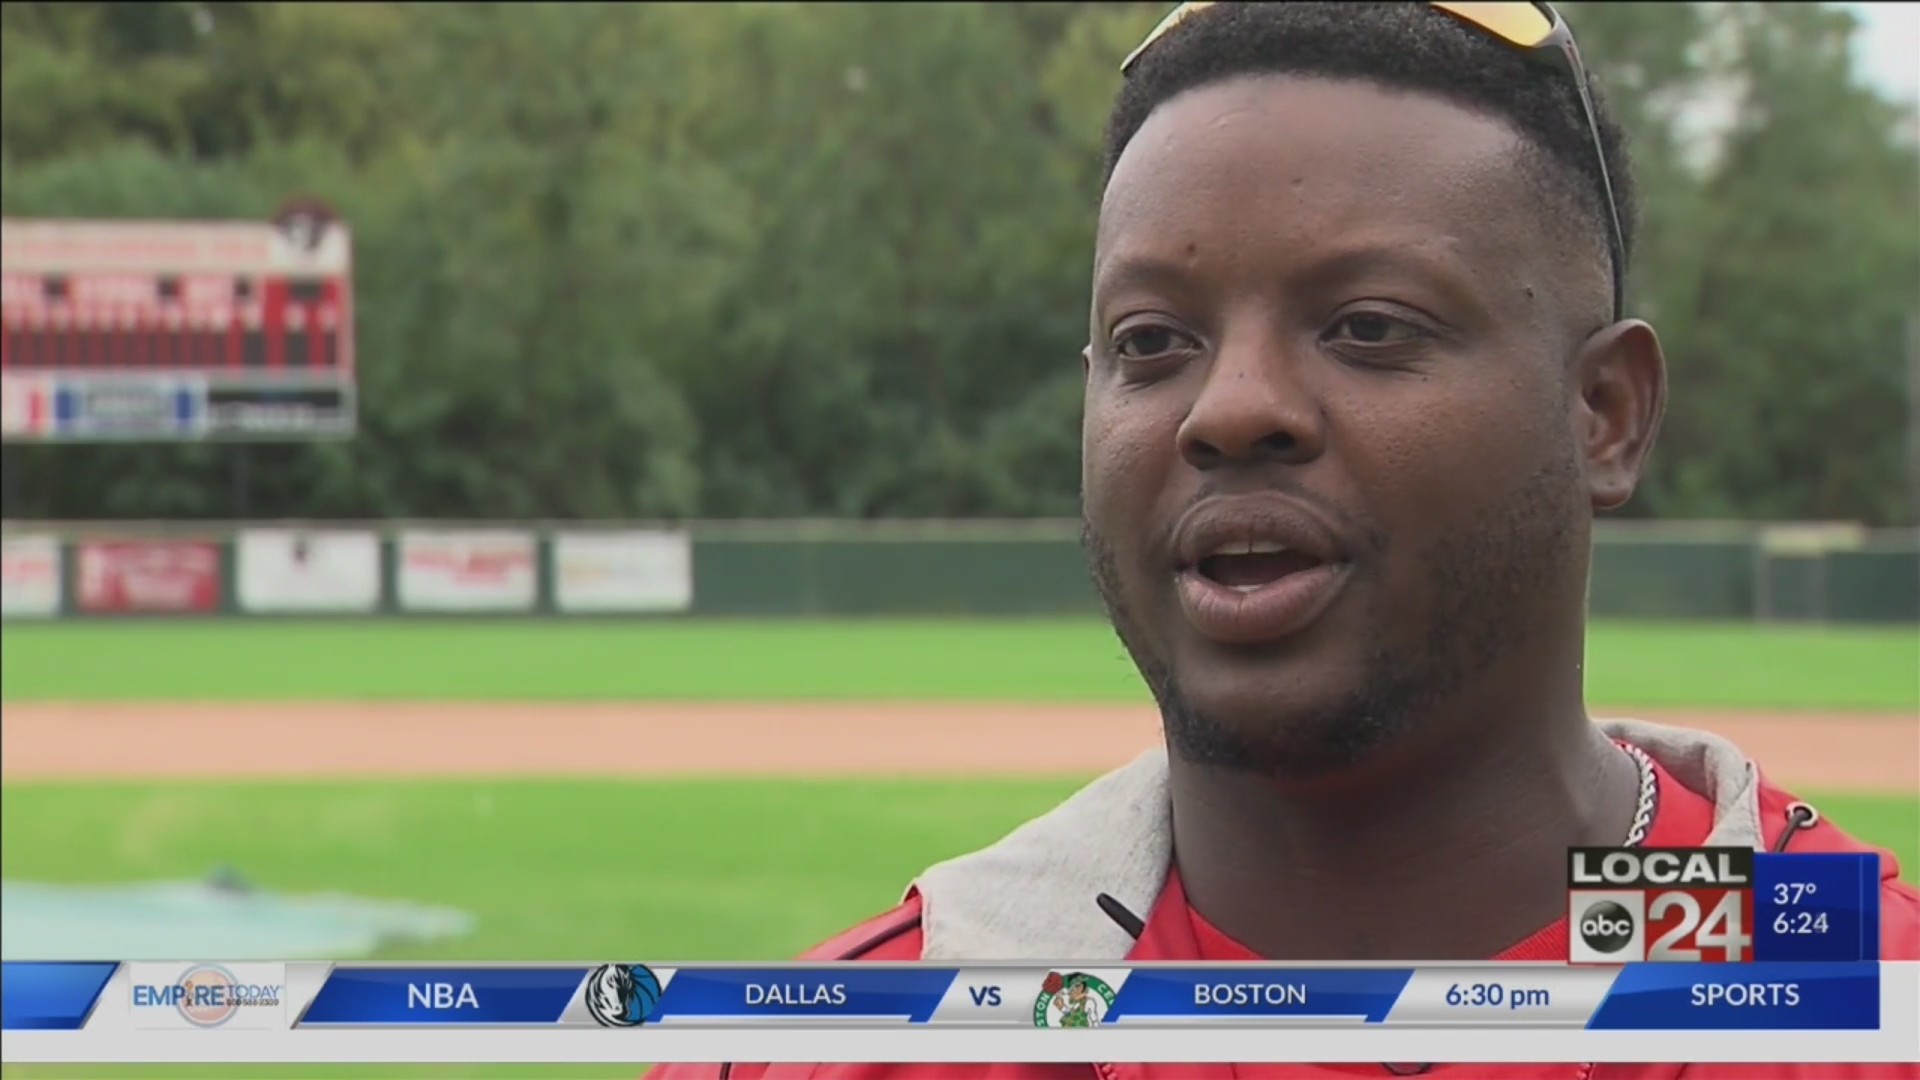 He had a scholarship for baseball, but CBU's assistant coach gave it up to serve his country